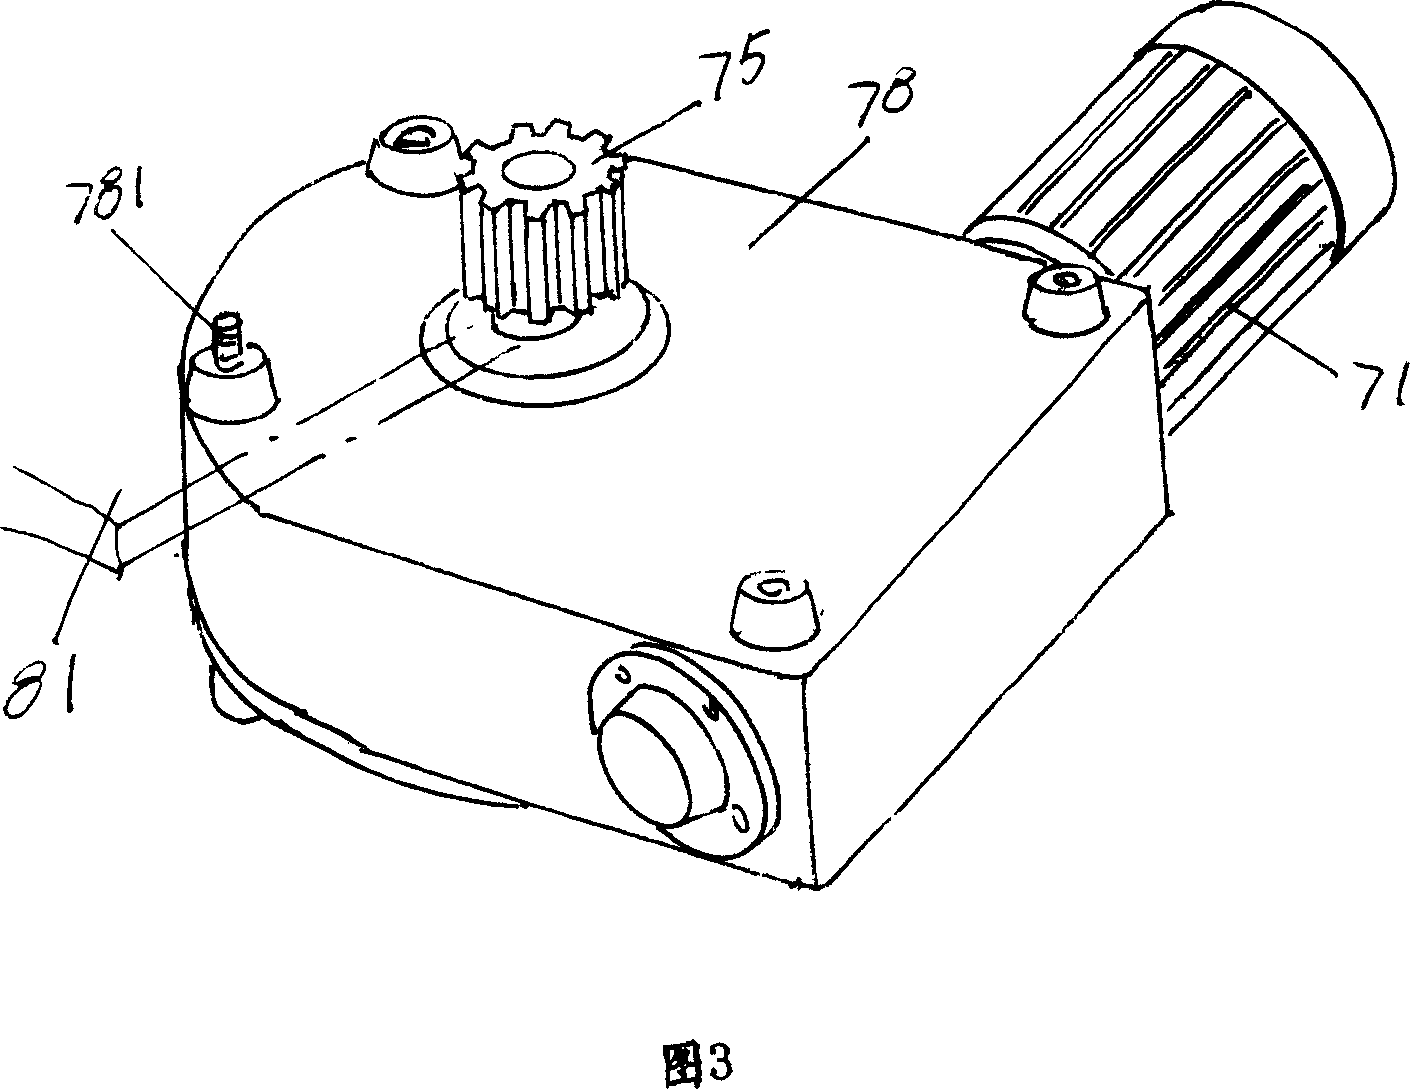 Throwing mechanism for cabin cleaning vehicle